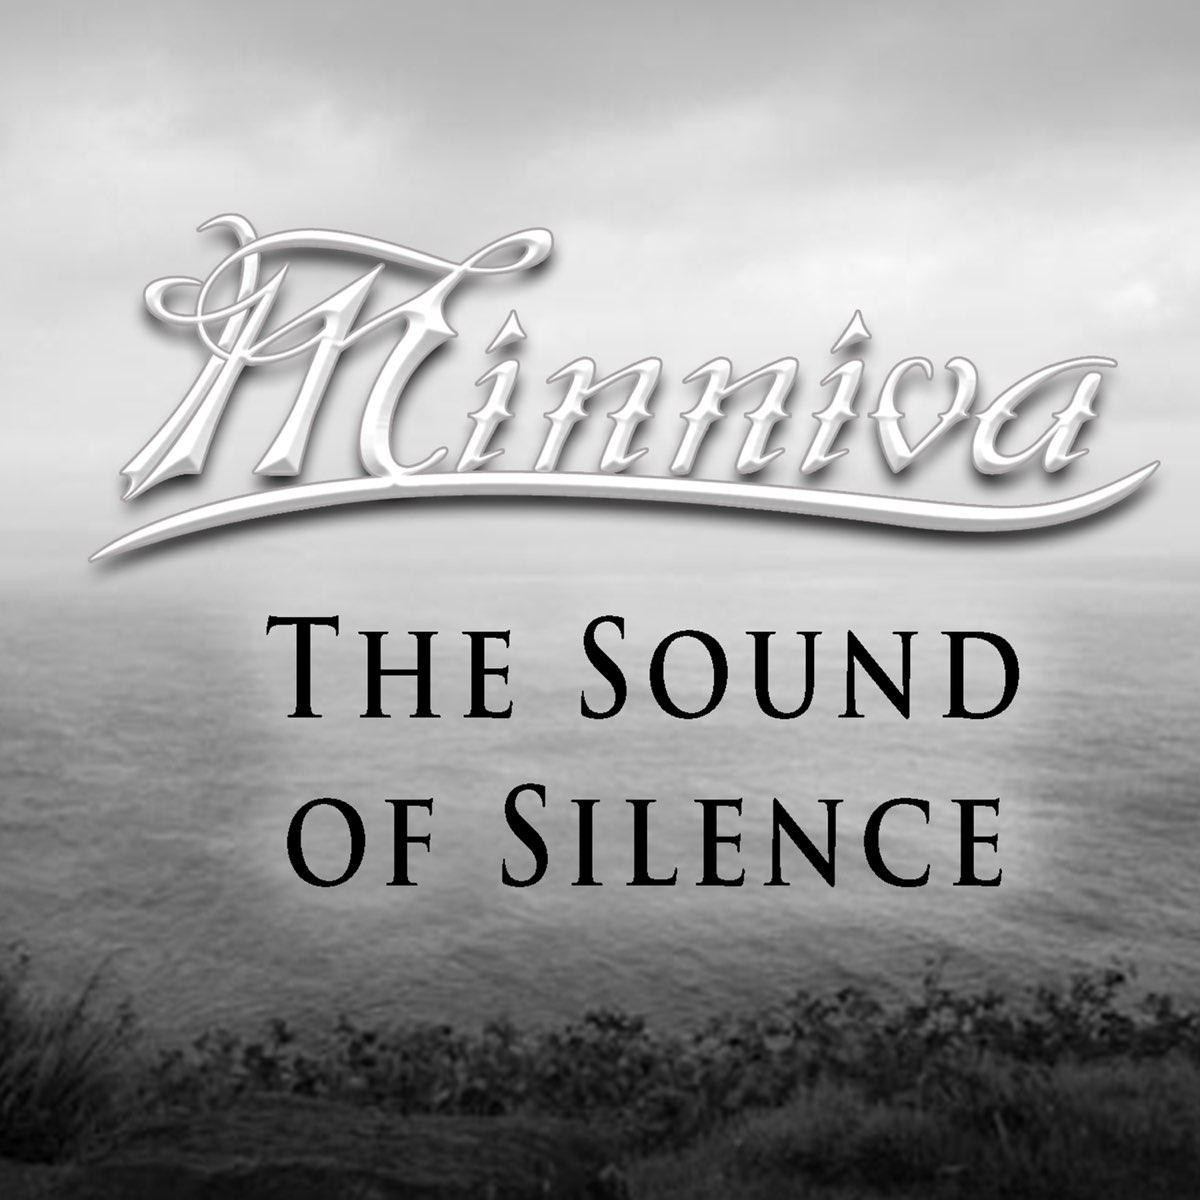 The sound of silence cyril remix слушать. Sound of Silence. Sound of Silence альбом. Альбом the Sound. Silence обложка.